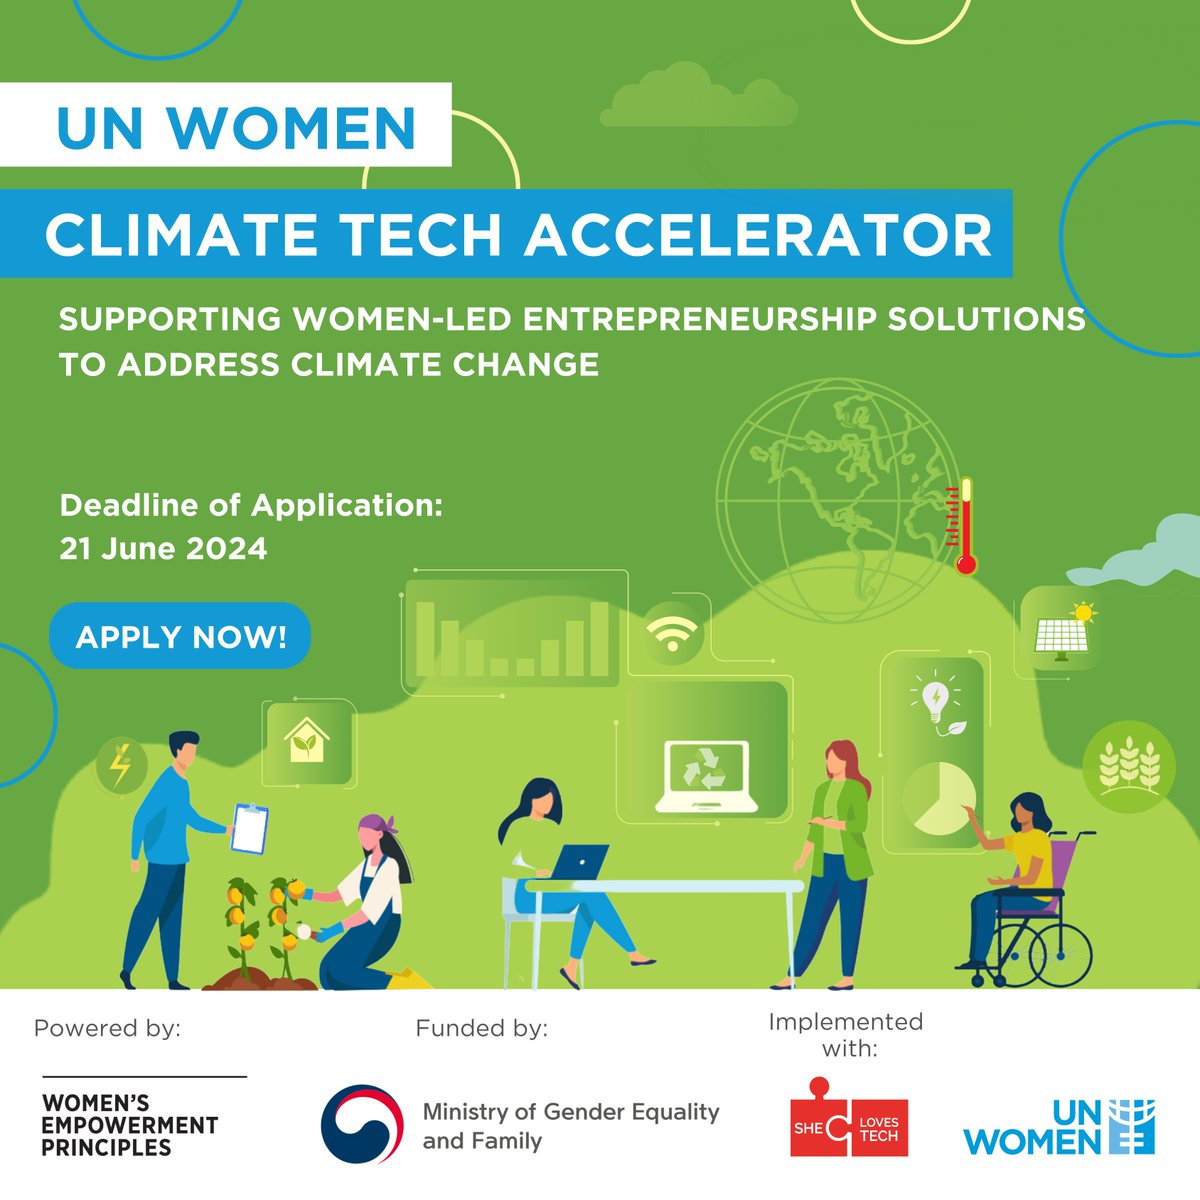 🌍💡Are you a woman founder developing solutions to combat climate change in ASEAN? Apply now for our 𝐂𝐥𝐢𝐦𝐚𝐭𝐞 𝐓𝐞𝐜𝐡 𝐄𝐧𝐭𝐫𝐞𝐩𝐫𝐞𝐧𝐞𝐮𝐫𝐬𝐡𝐢𝐩 𝐀𝐜𝐜𝐞𝐥𝐞𝐫𝐚𝐭𝐨𝐫 𝐏𝐫𝐨𝐠𝐫𝐚𝐦!💡🌍

🔗 ow.ly/6ZGO50RB31Y